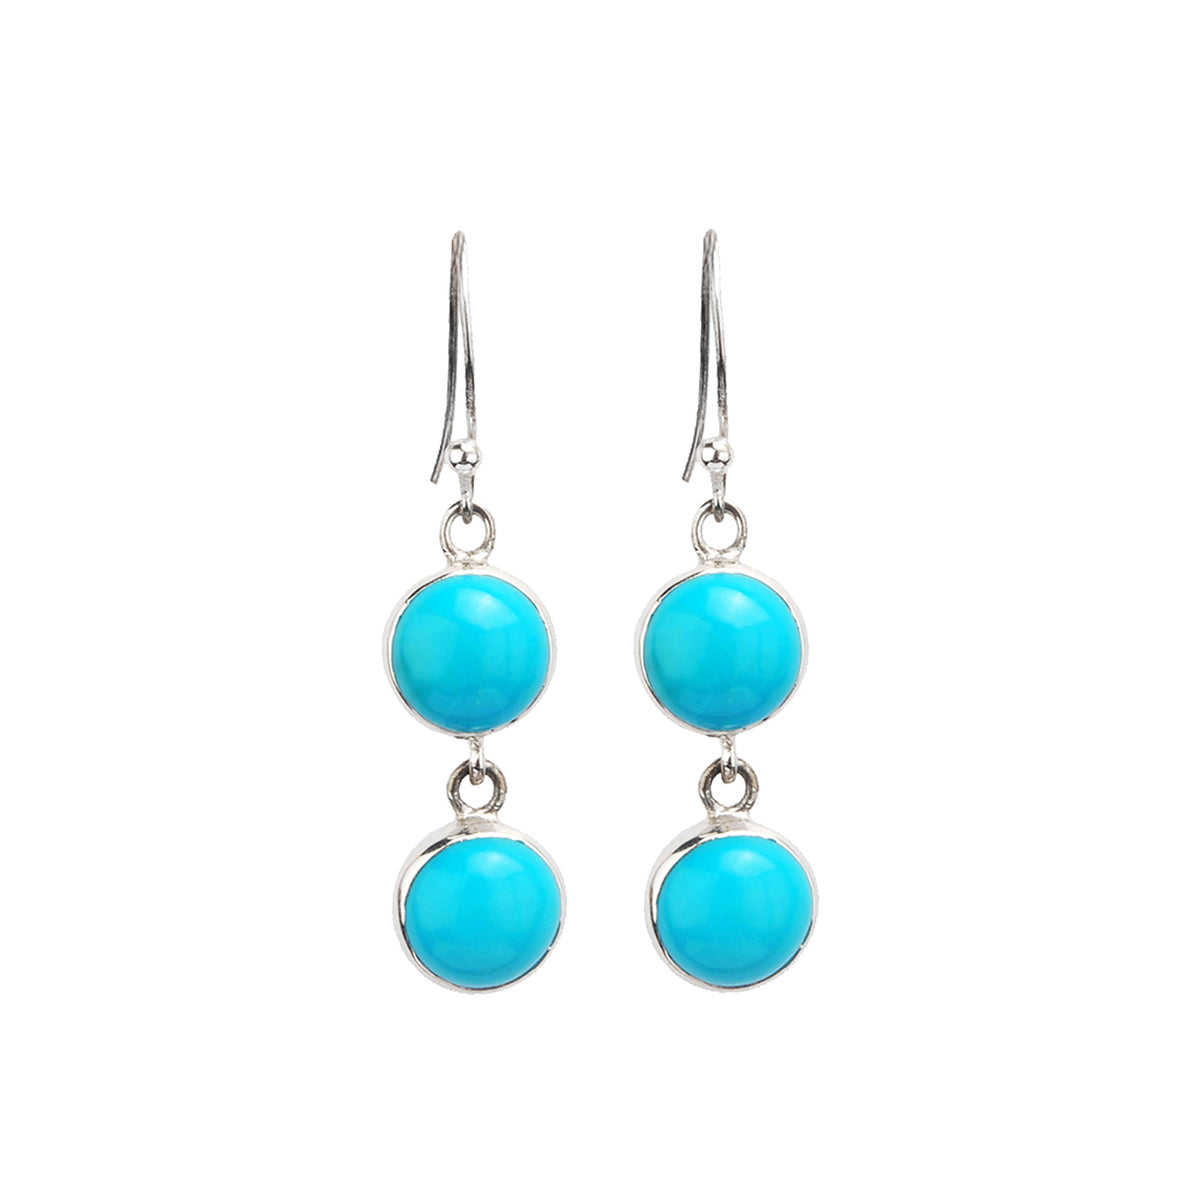 Round turquoise hanging earrings